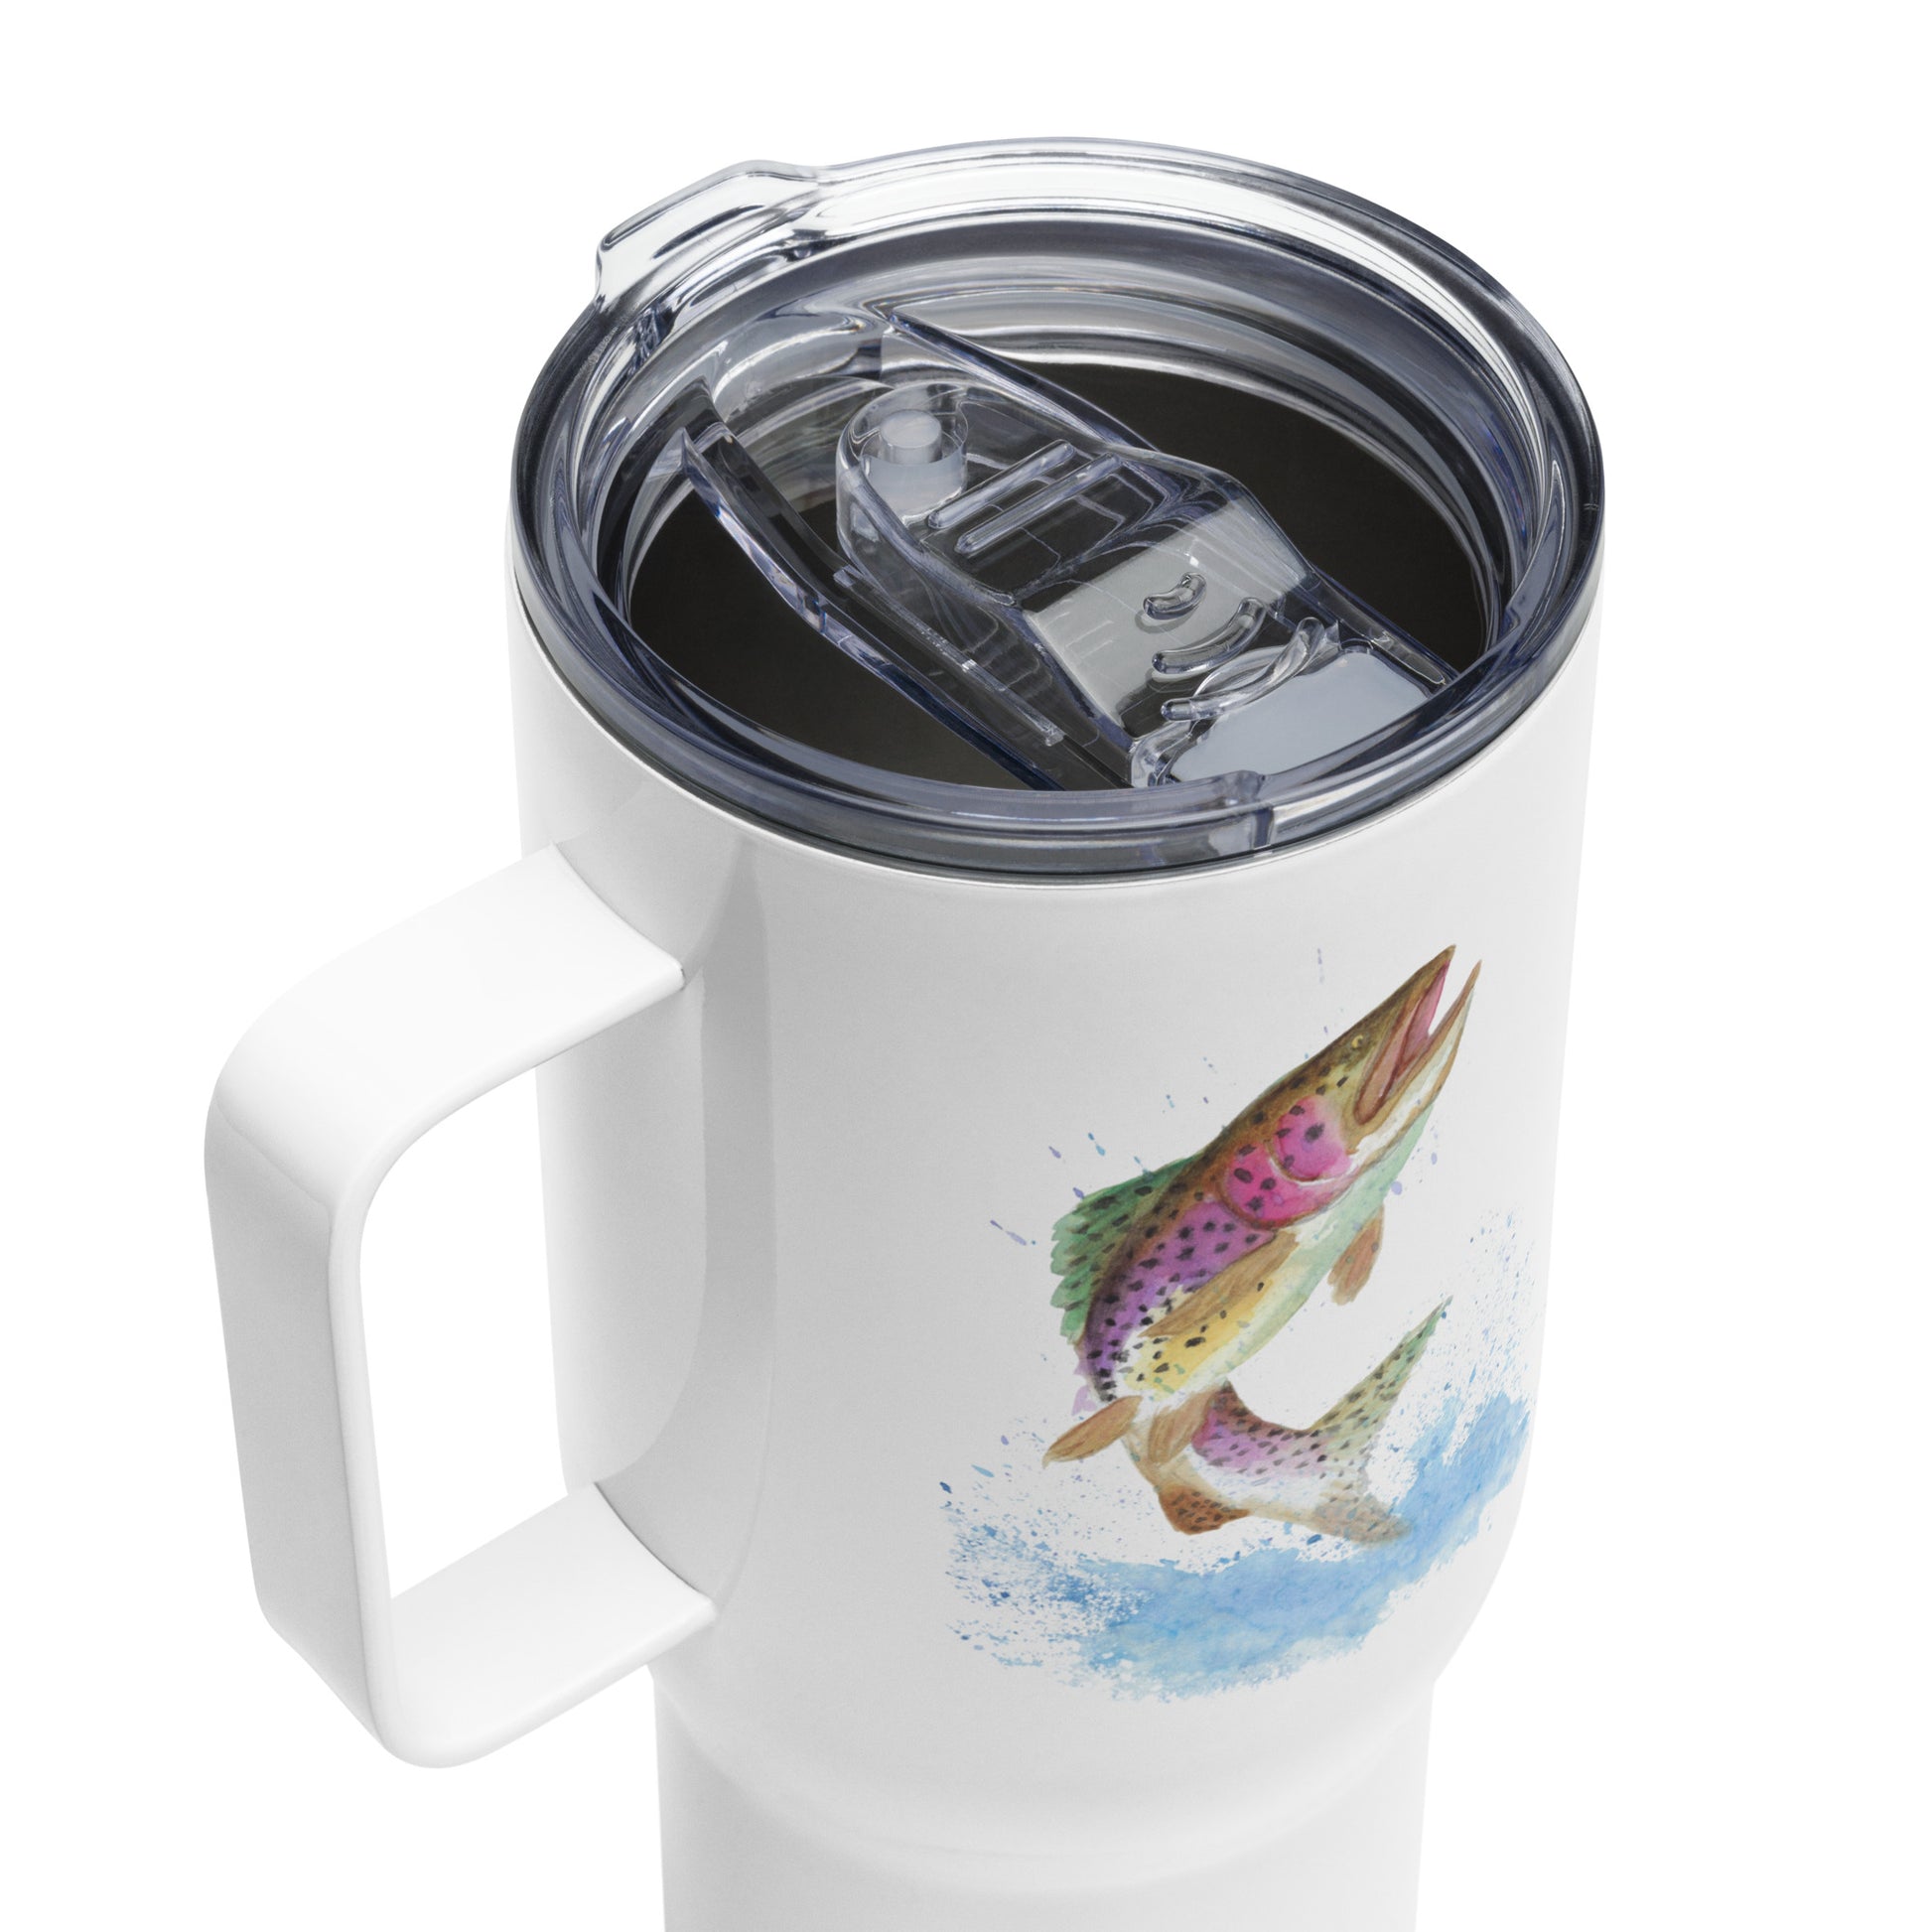 Stainless steel travel mug with handle. Holds 25 ounces of hot or cold drinks. Has print of watercolor rainbow trout fish on both sides. Fits most car cup holders. Comes with spill-proof BPA-free plastic lid. Detail view of lid.